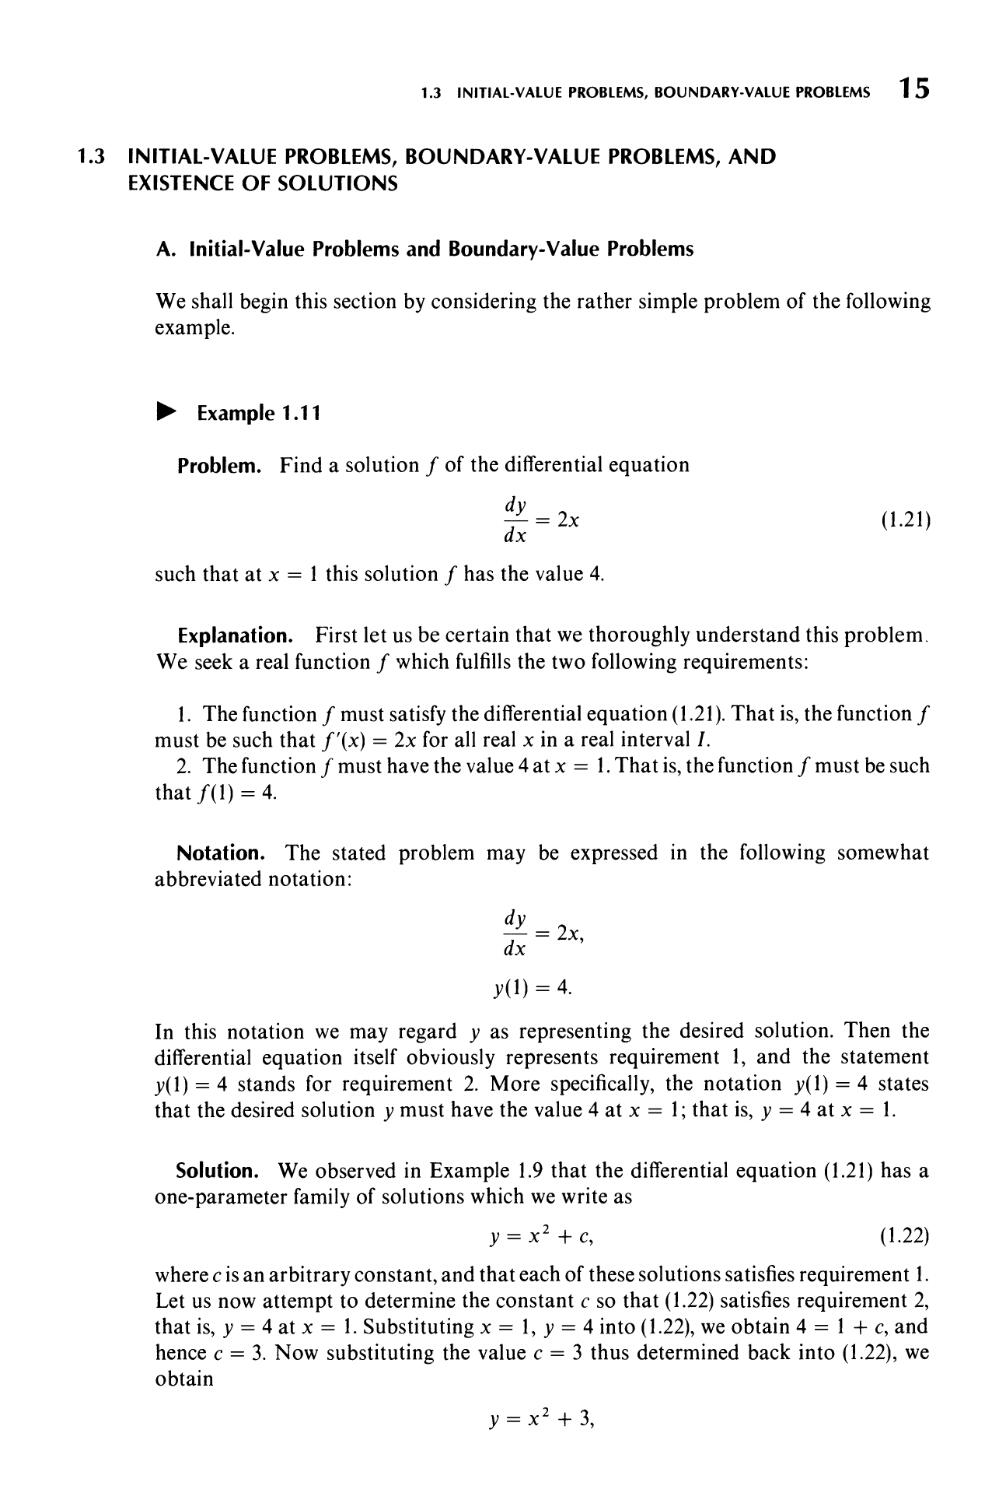 1.3  Initial-Value problems, Boundary-Value problems, and Existence of solutions